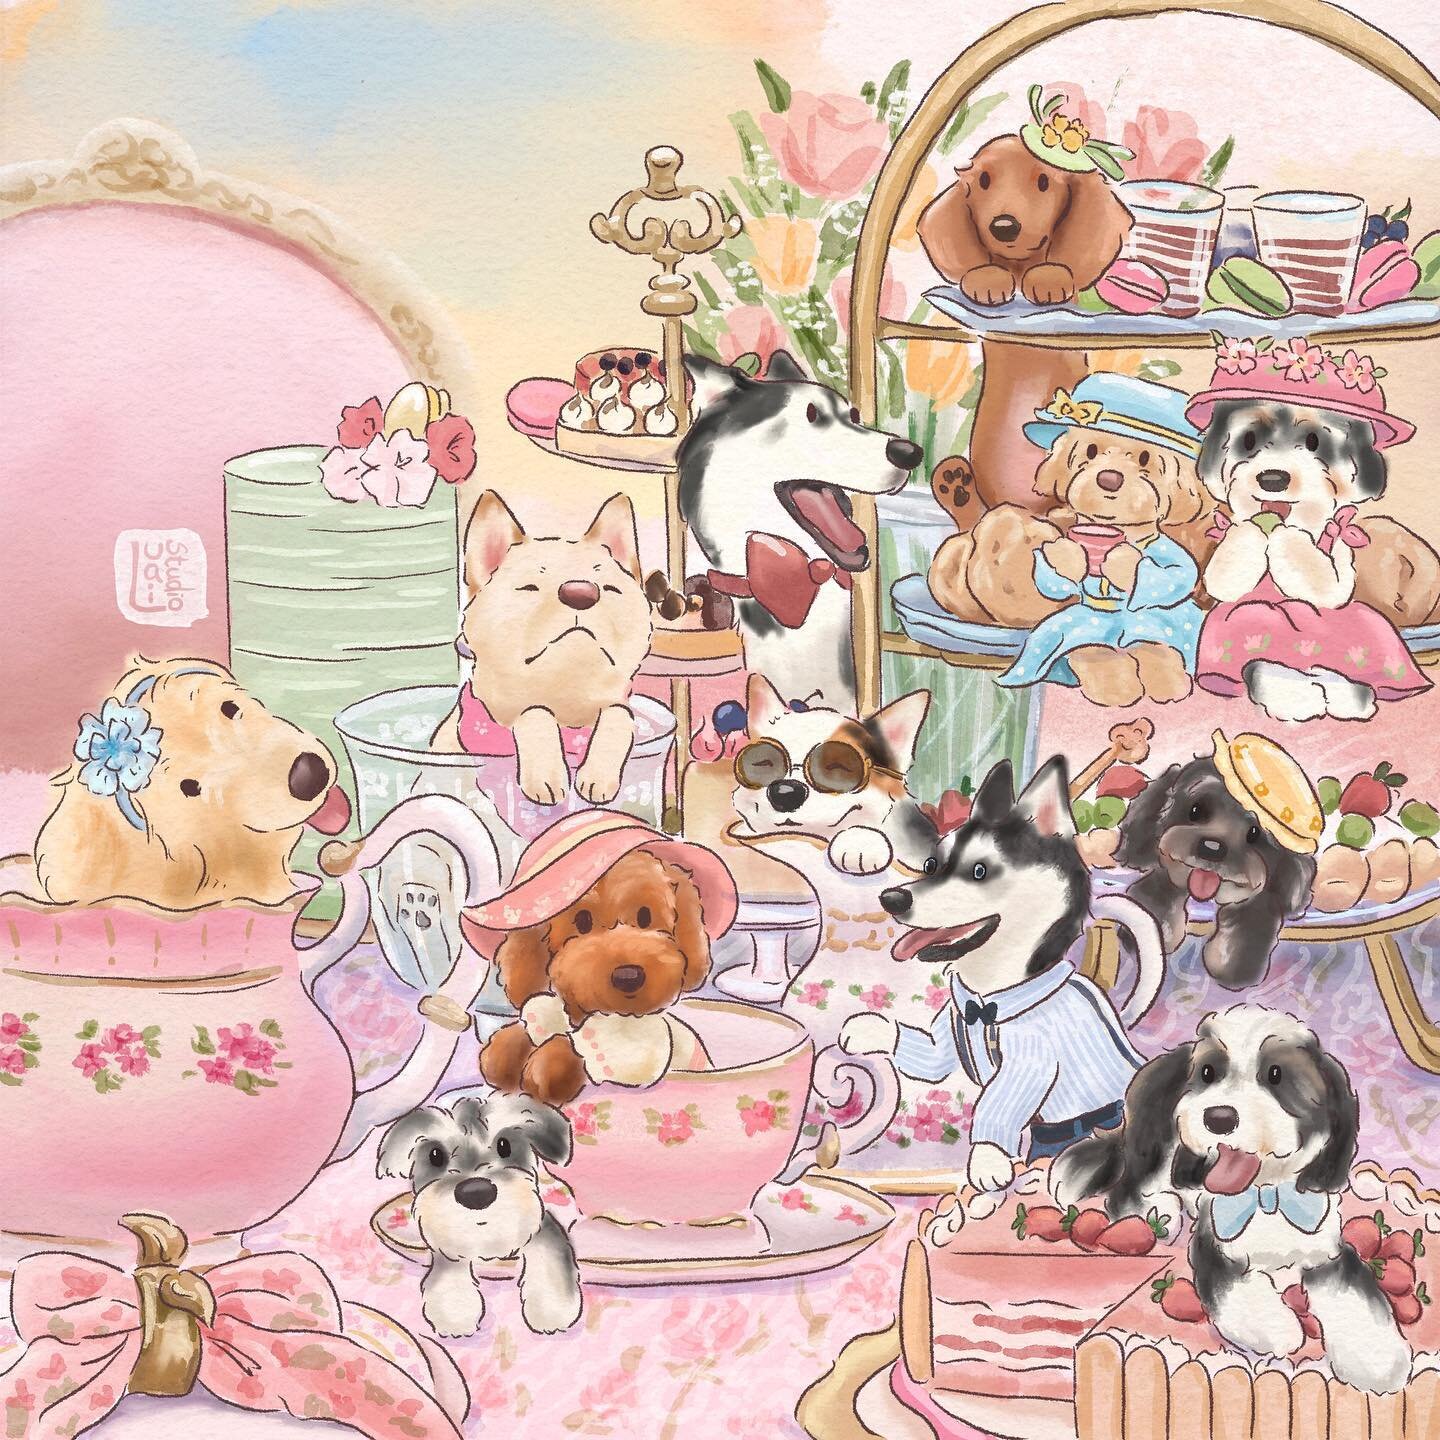 Tea time just got a whole lot cuter 🐶 My ambassador group is expanding and these fluffy muses are leading the way! ❤️